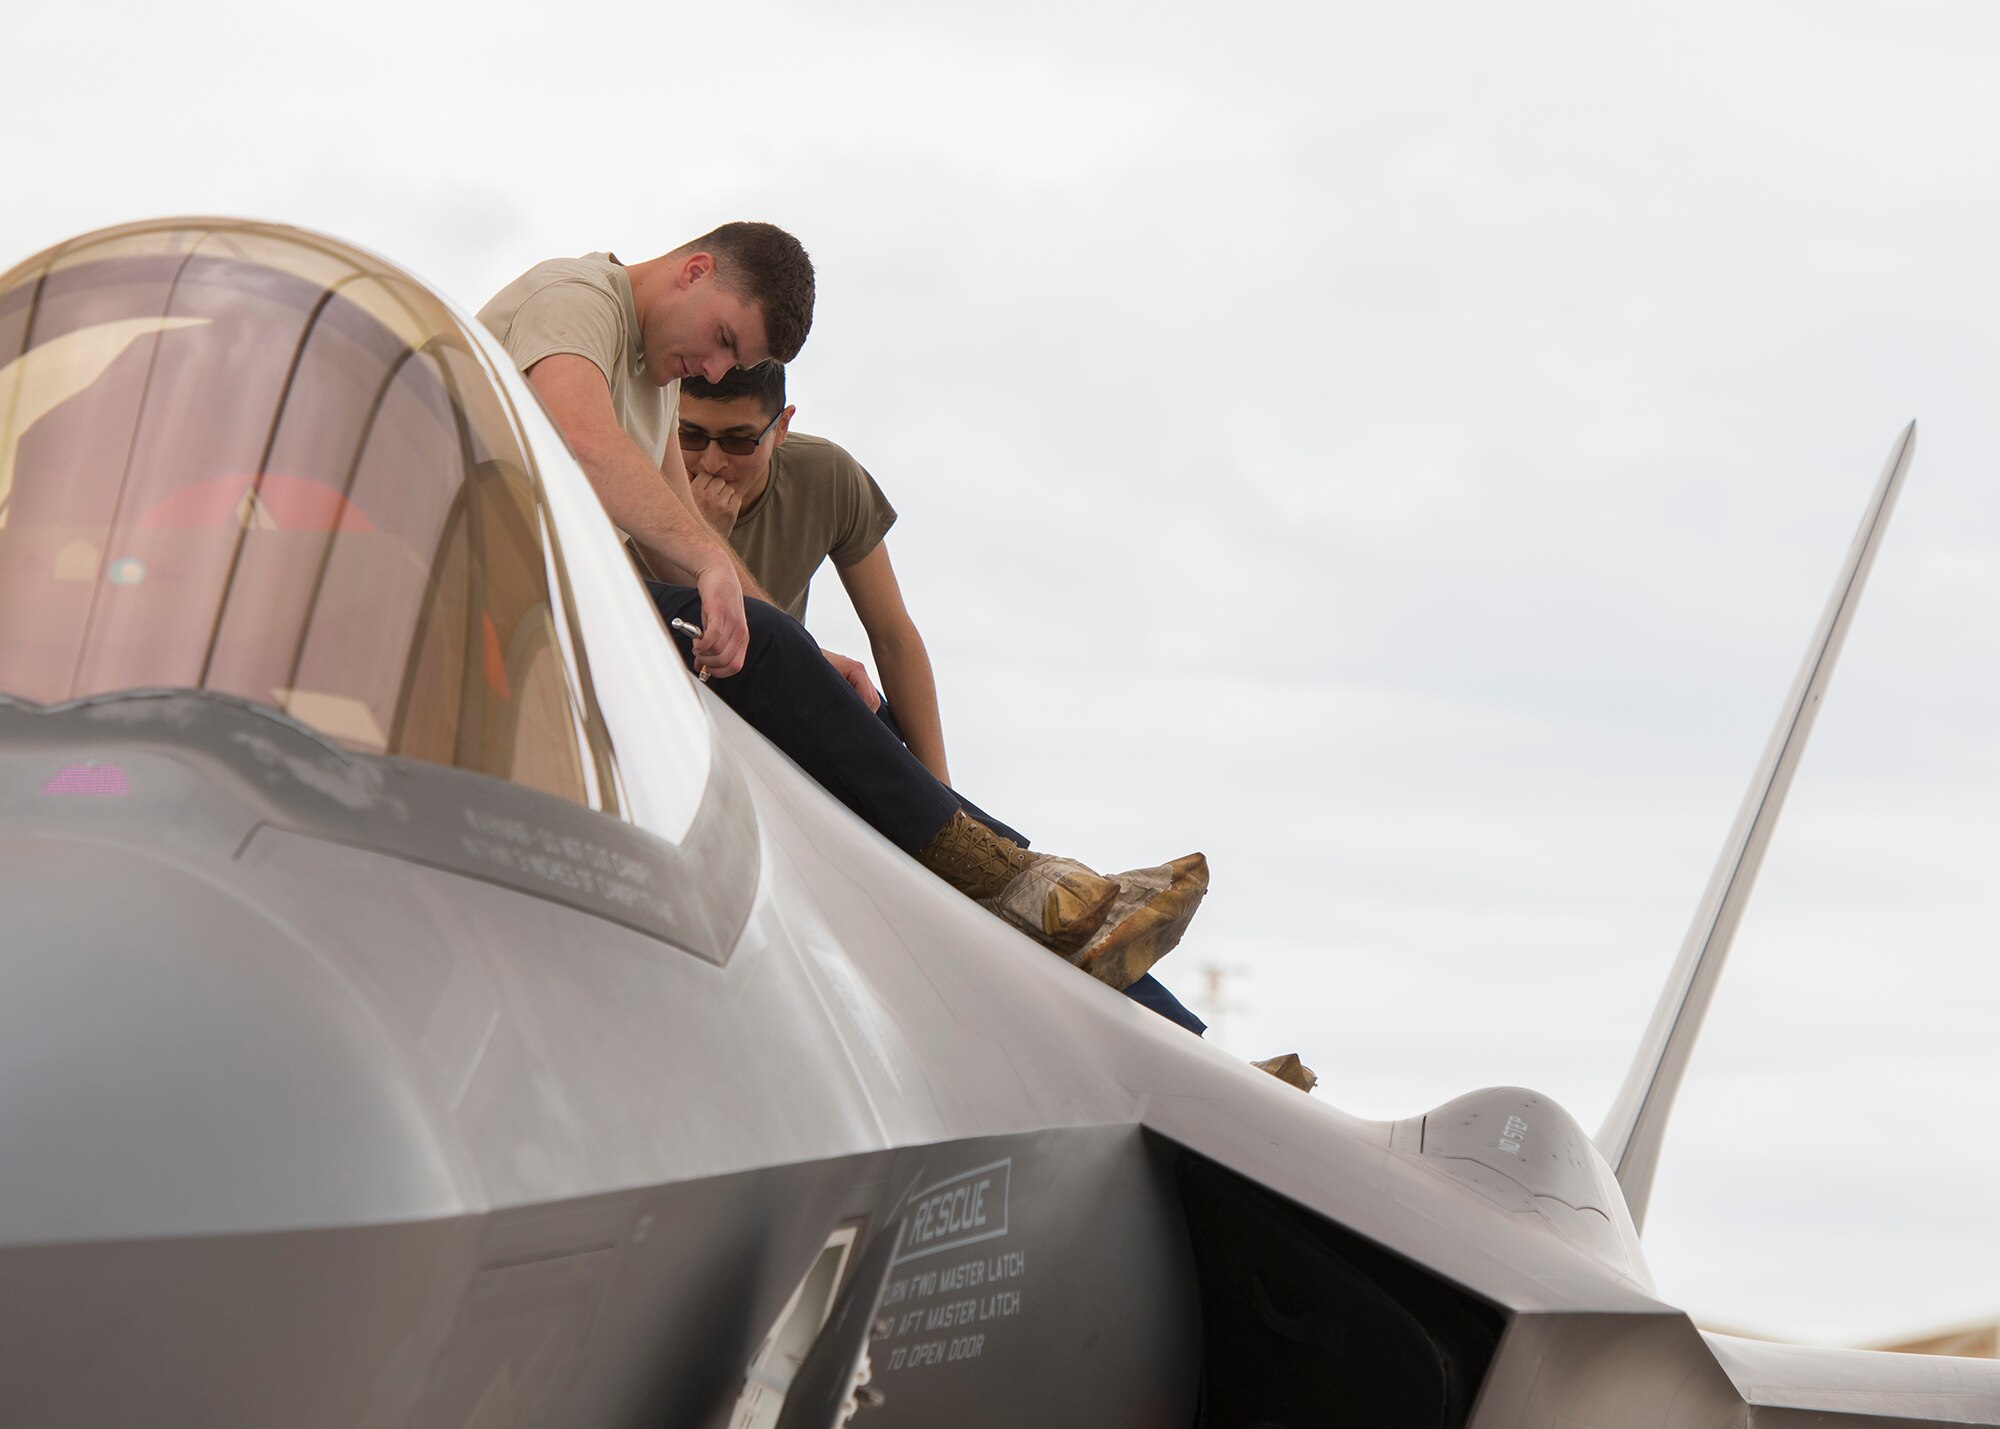 Senior Airman Brenden Hansen, 56th Component Maintenance Squadron maintainer, and Airman 1st Class Christian Cervantes, 63rd Aircraft Maintenance Unit maintainer, evaluate an F-35A Lightning II to ensure it is mission capable, March 10, 2020, at Luke Air Force Base, Ariz.